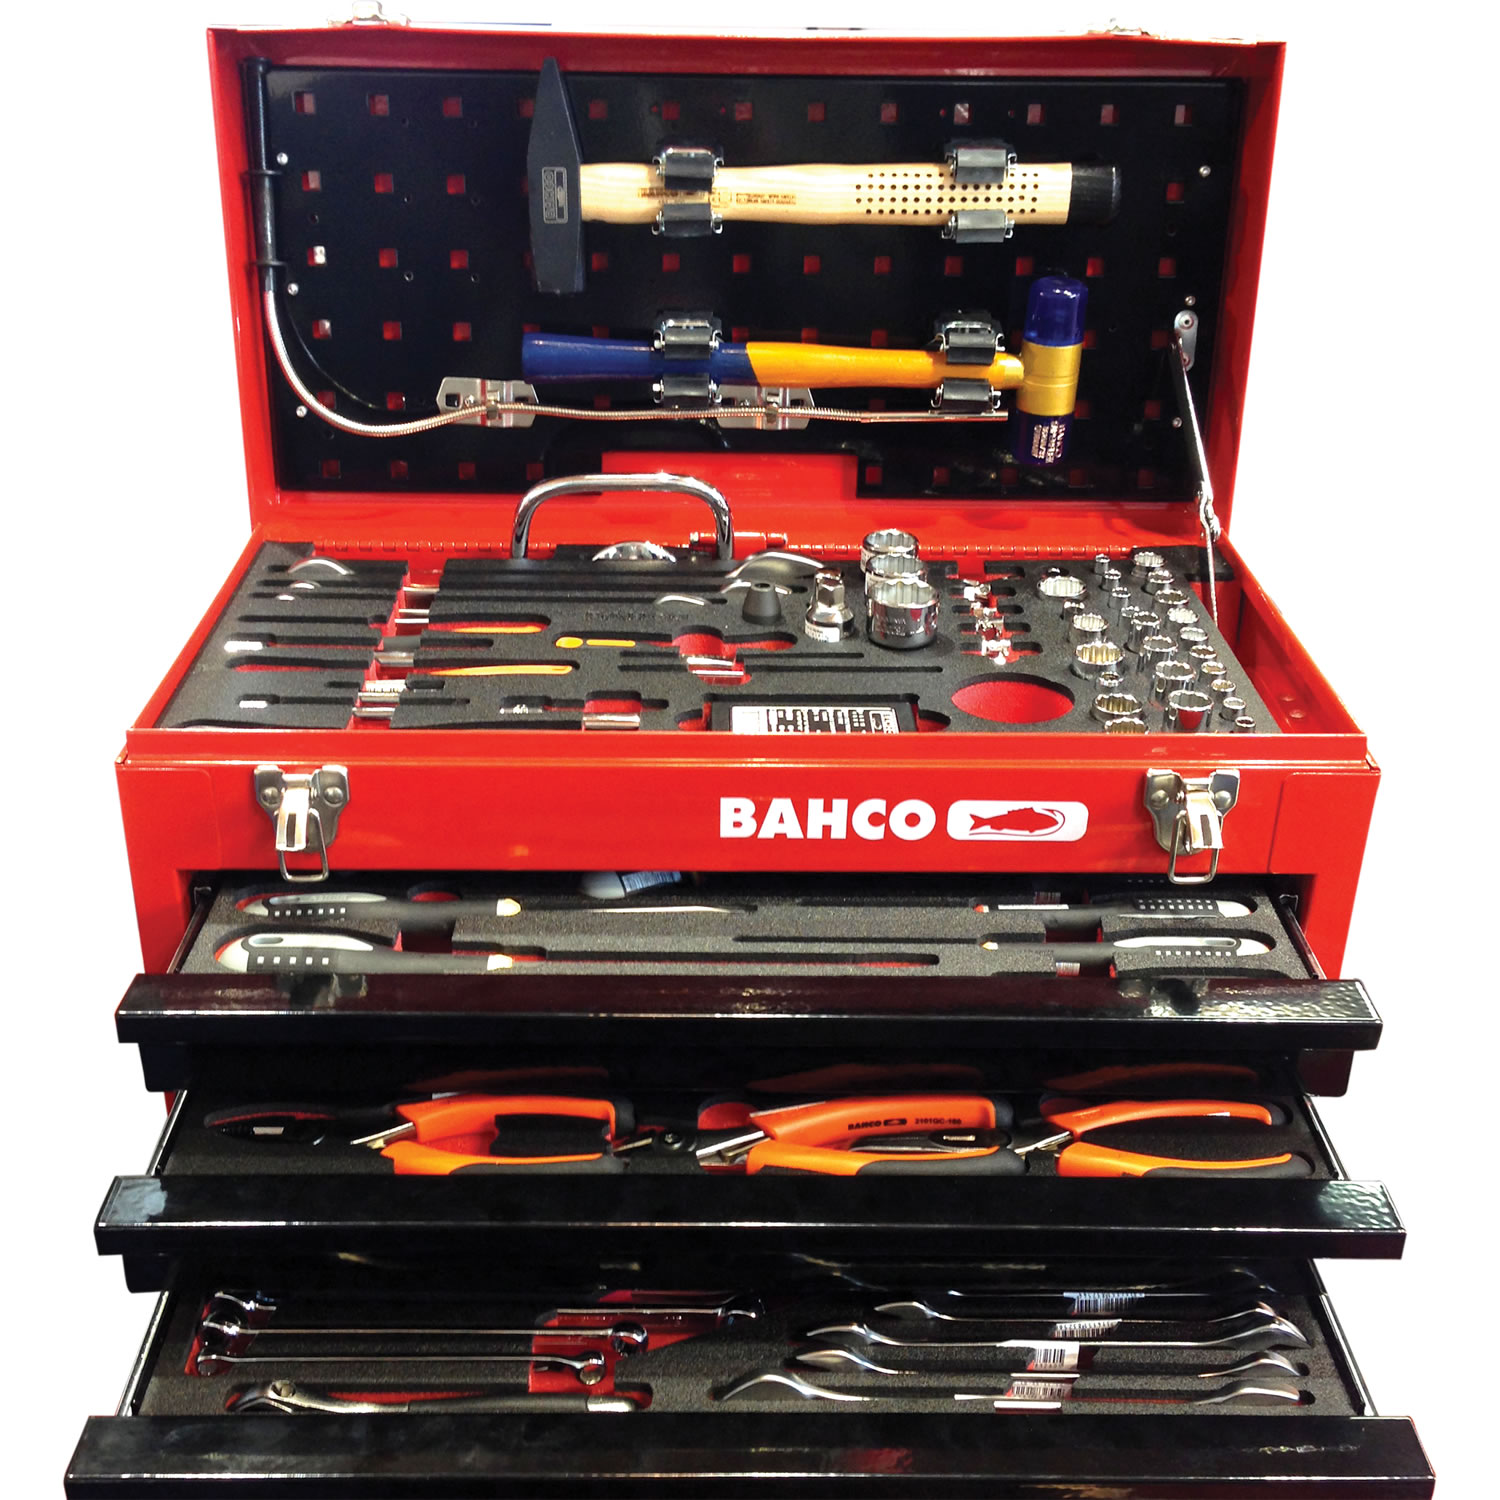 RBI9100TM - Aircraft Mechanic Metal Step Case - Imperial (SAE / Standard)  Kit - Includes 148 Tools - Red Box Tools & Foams